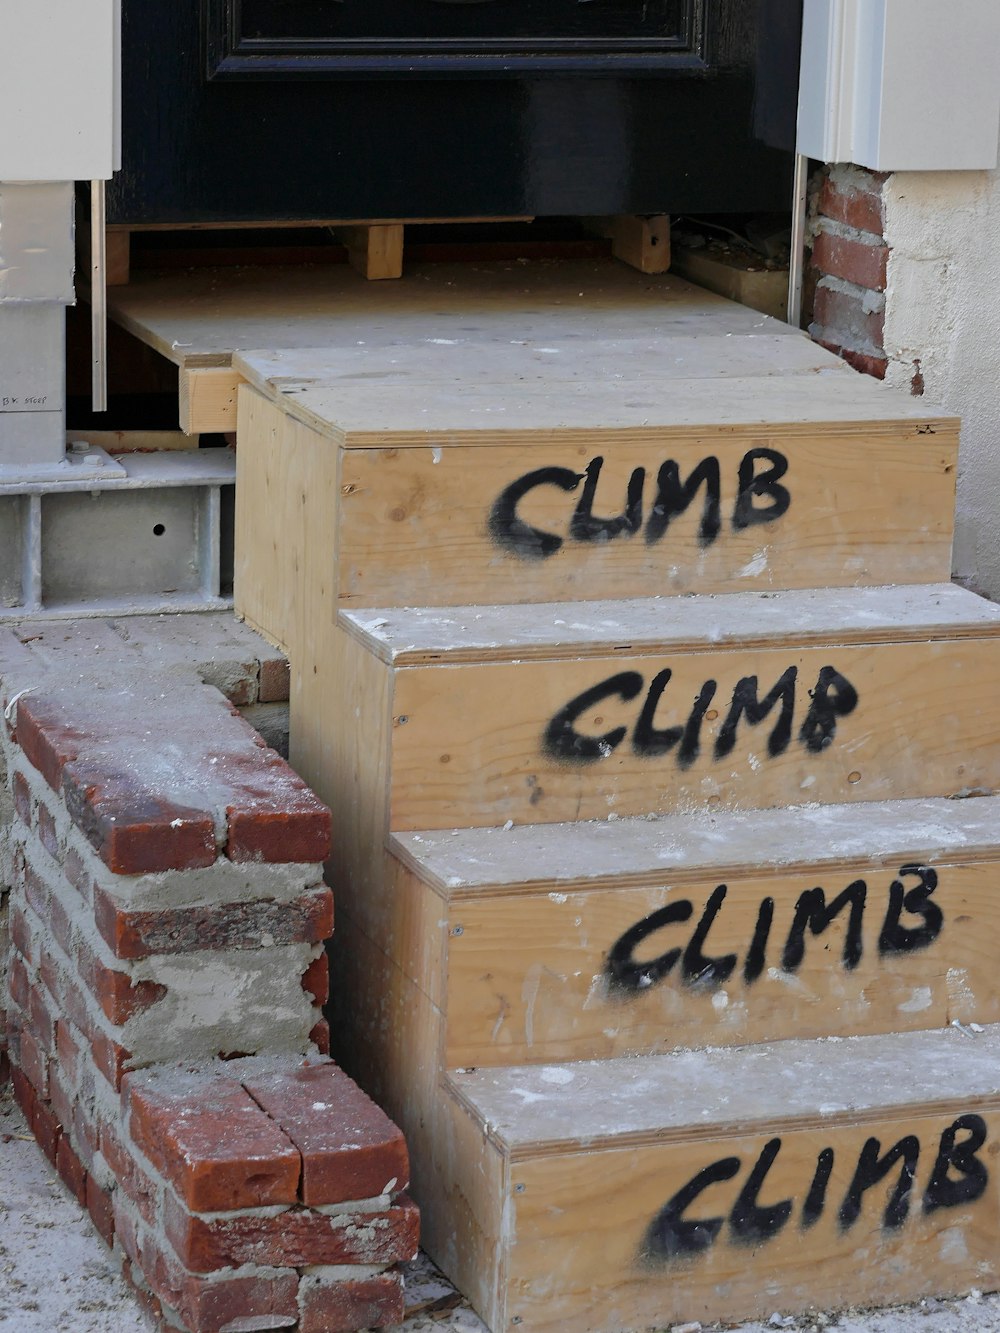 a set of steps with graffiti written on them